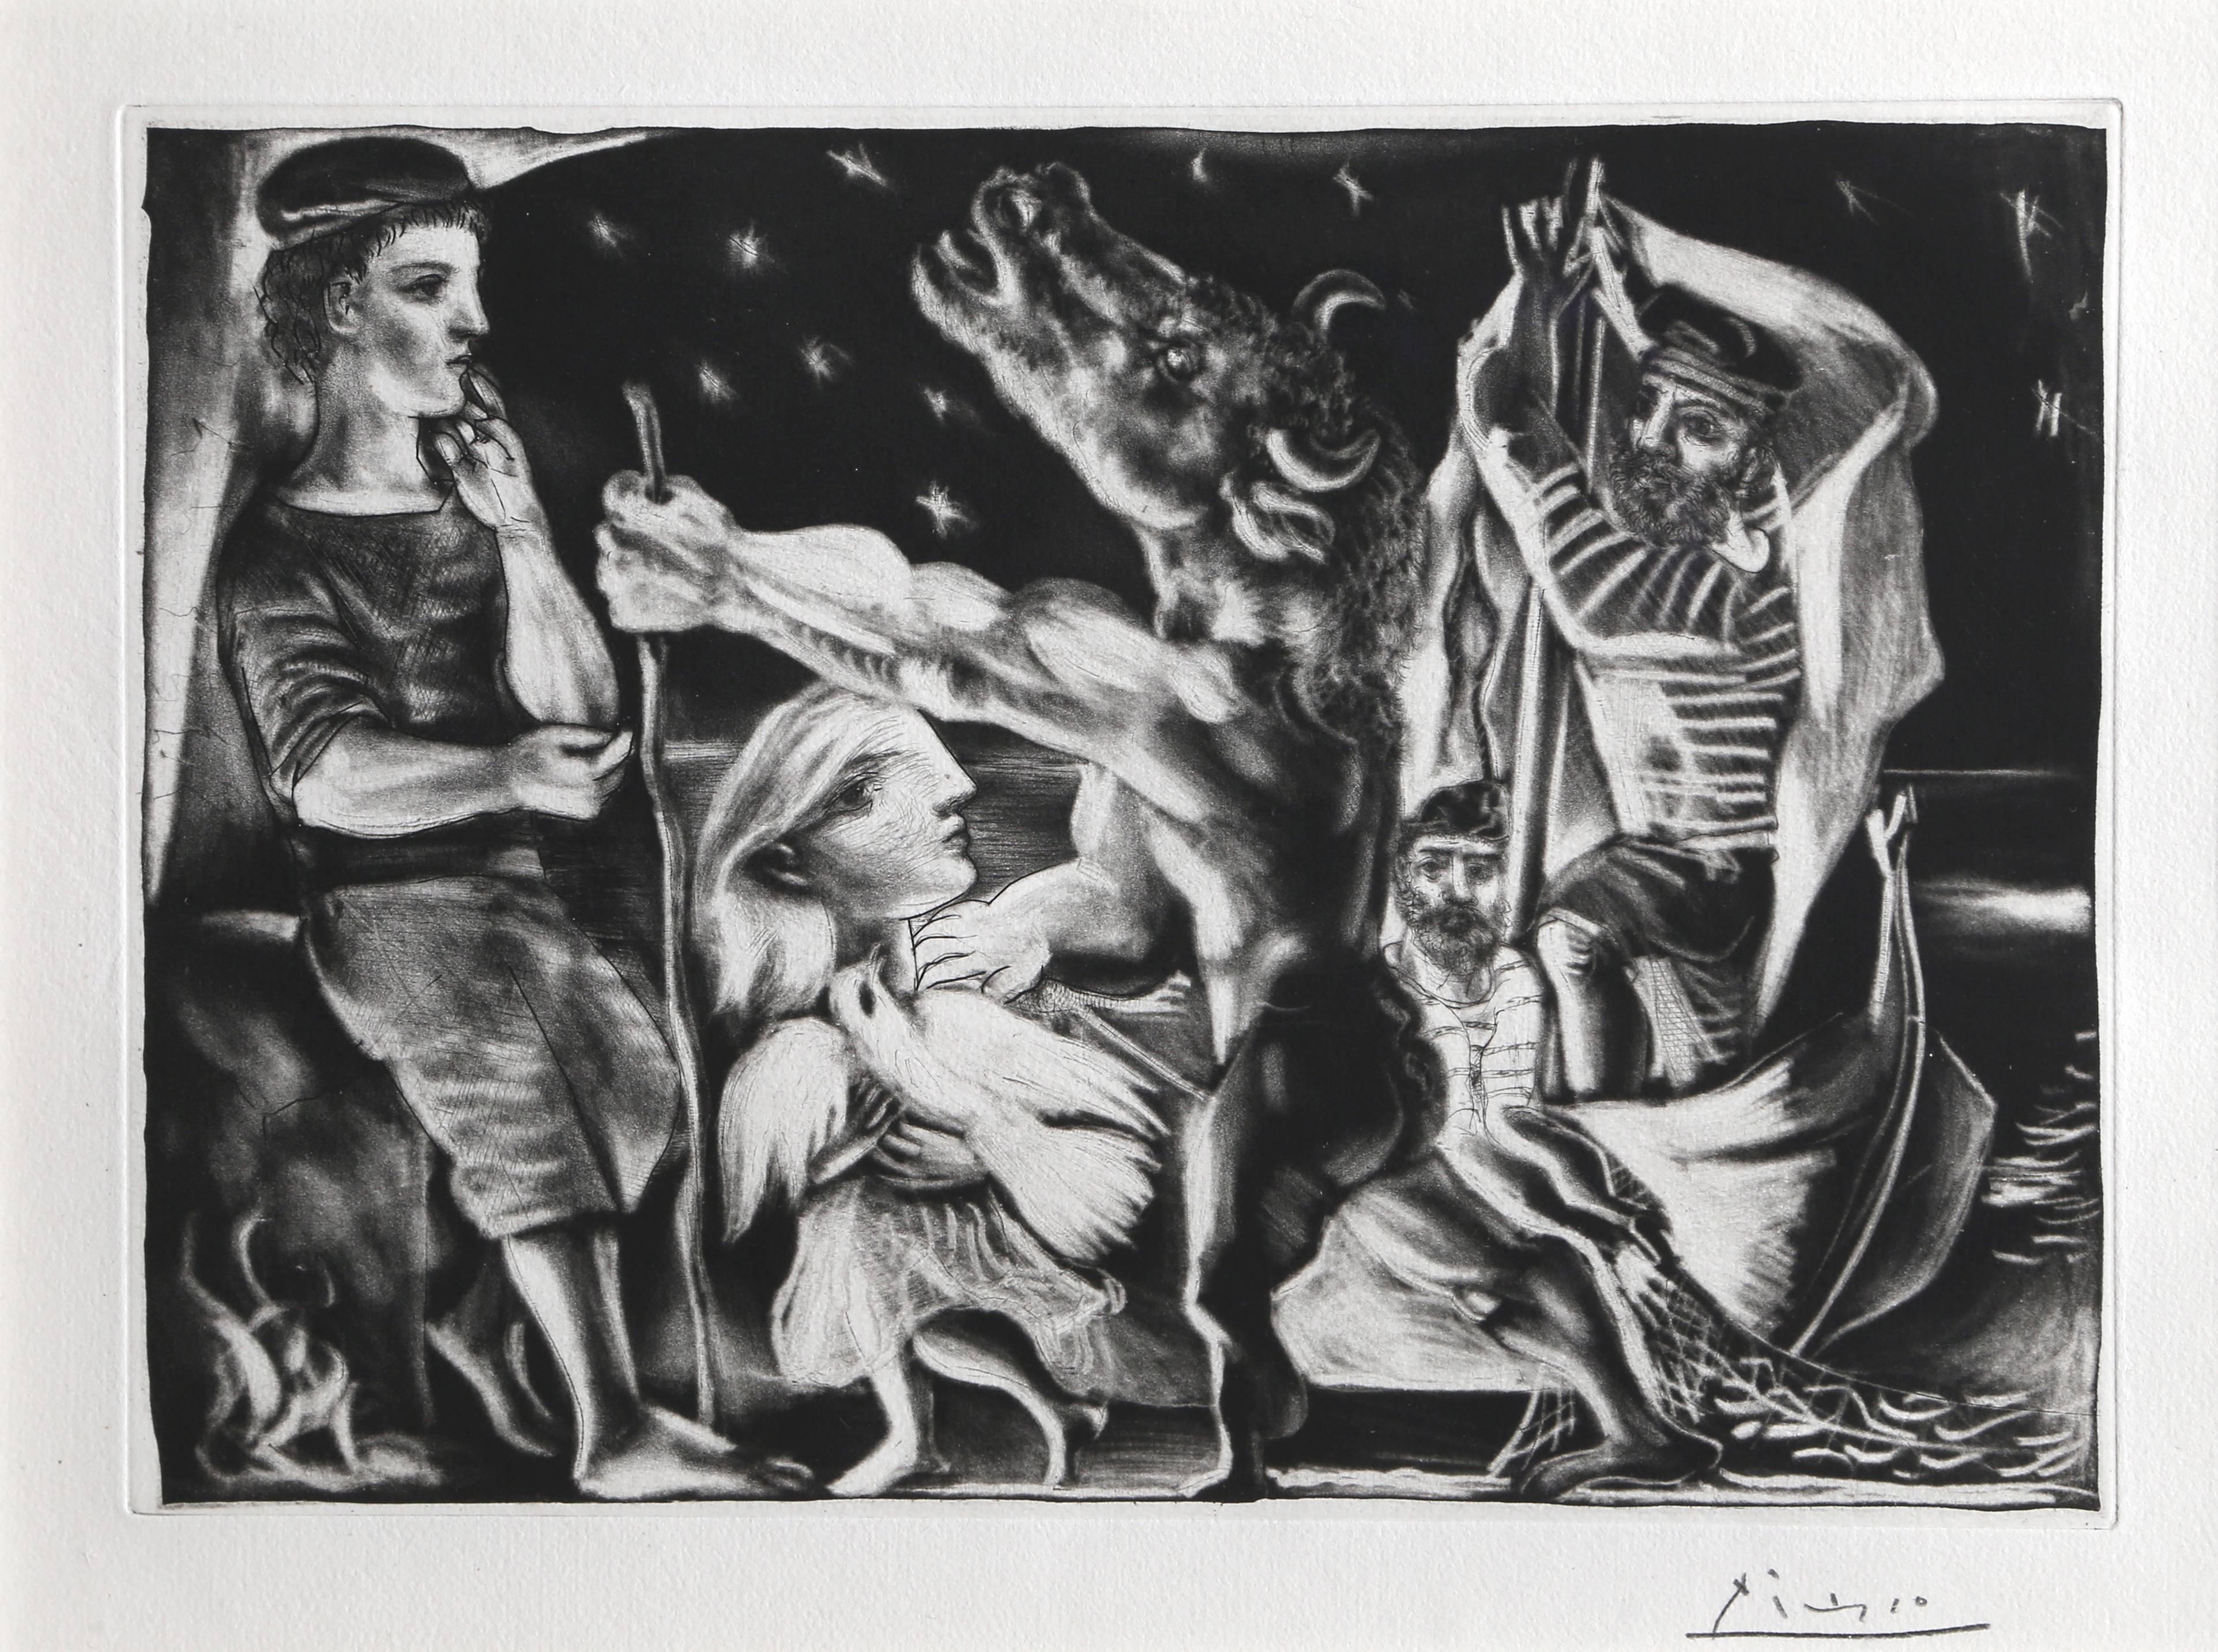 Picasso, Minotaure aveugle guidé par Marie-Thérèse, 1934 Signed Etching